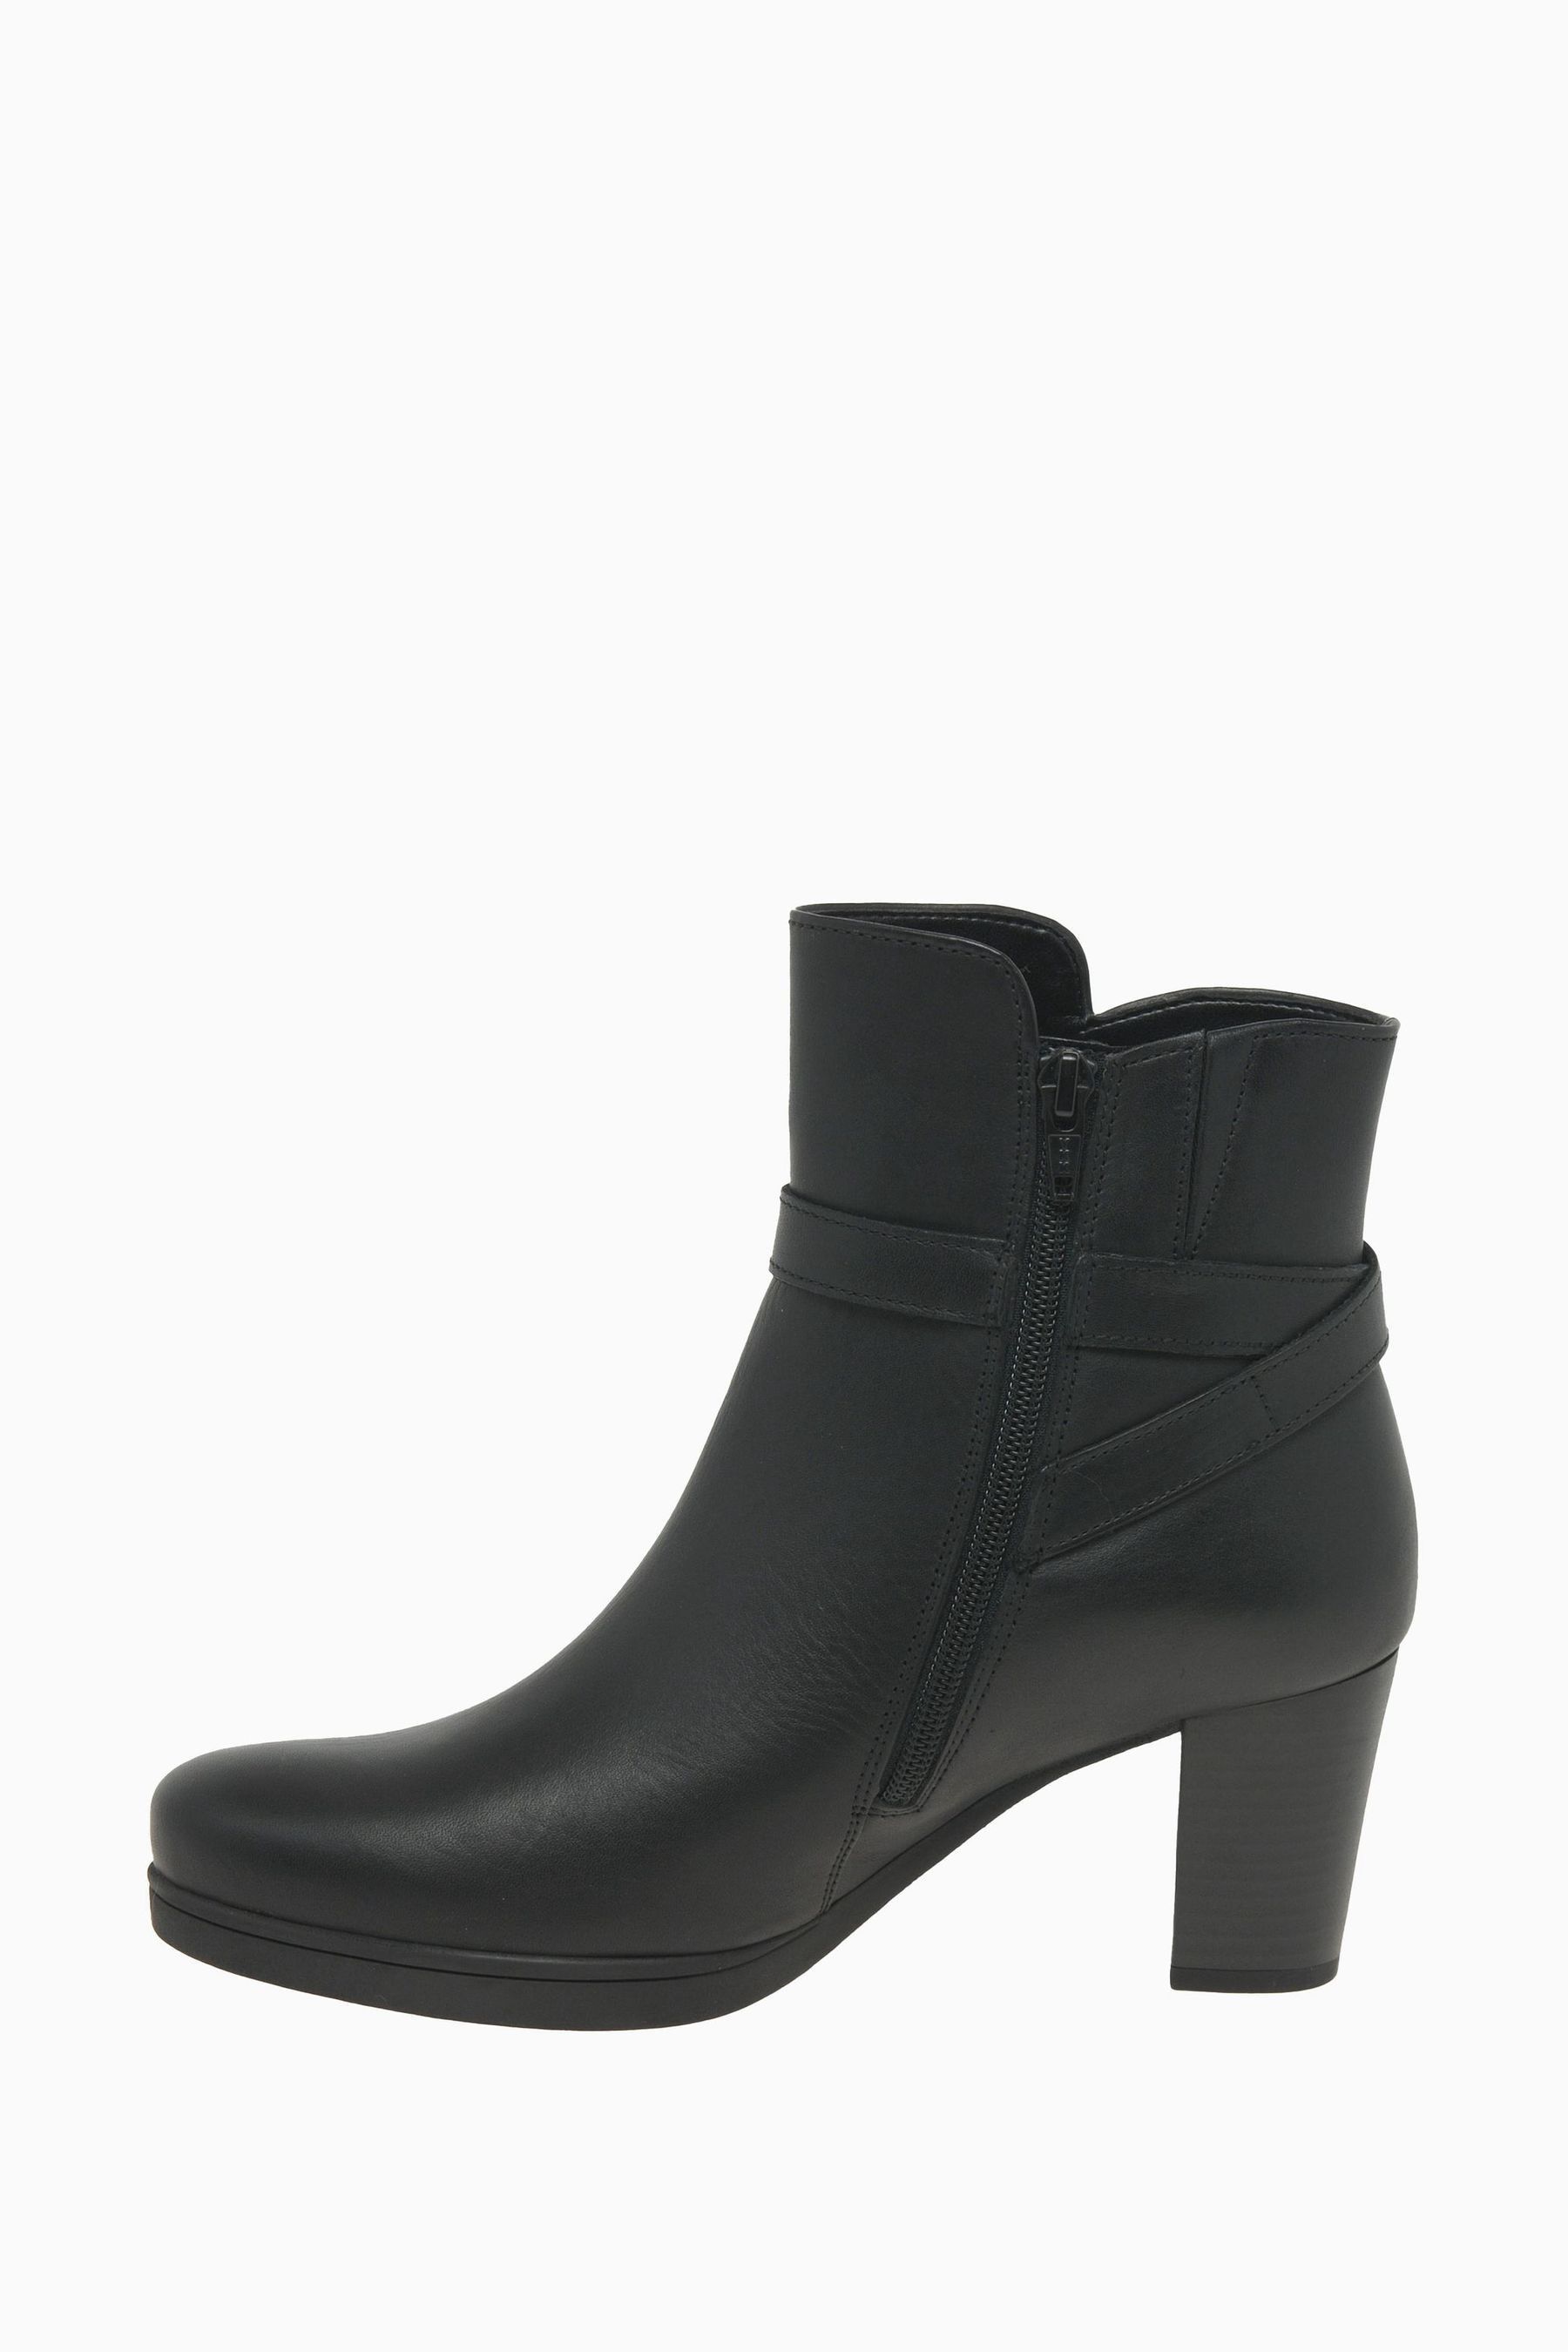 Buy Gabor Vaad Black Leather Ankle Boots from the Next UK online shop